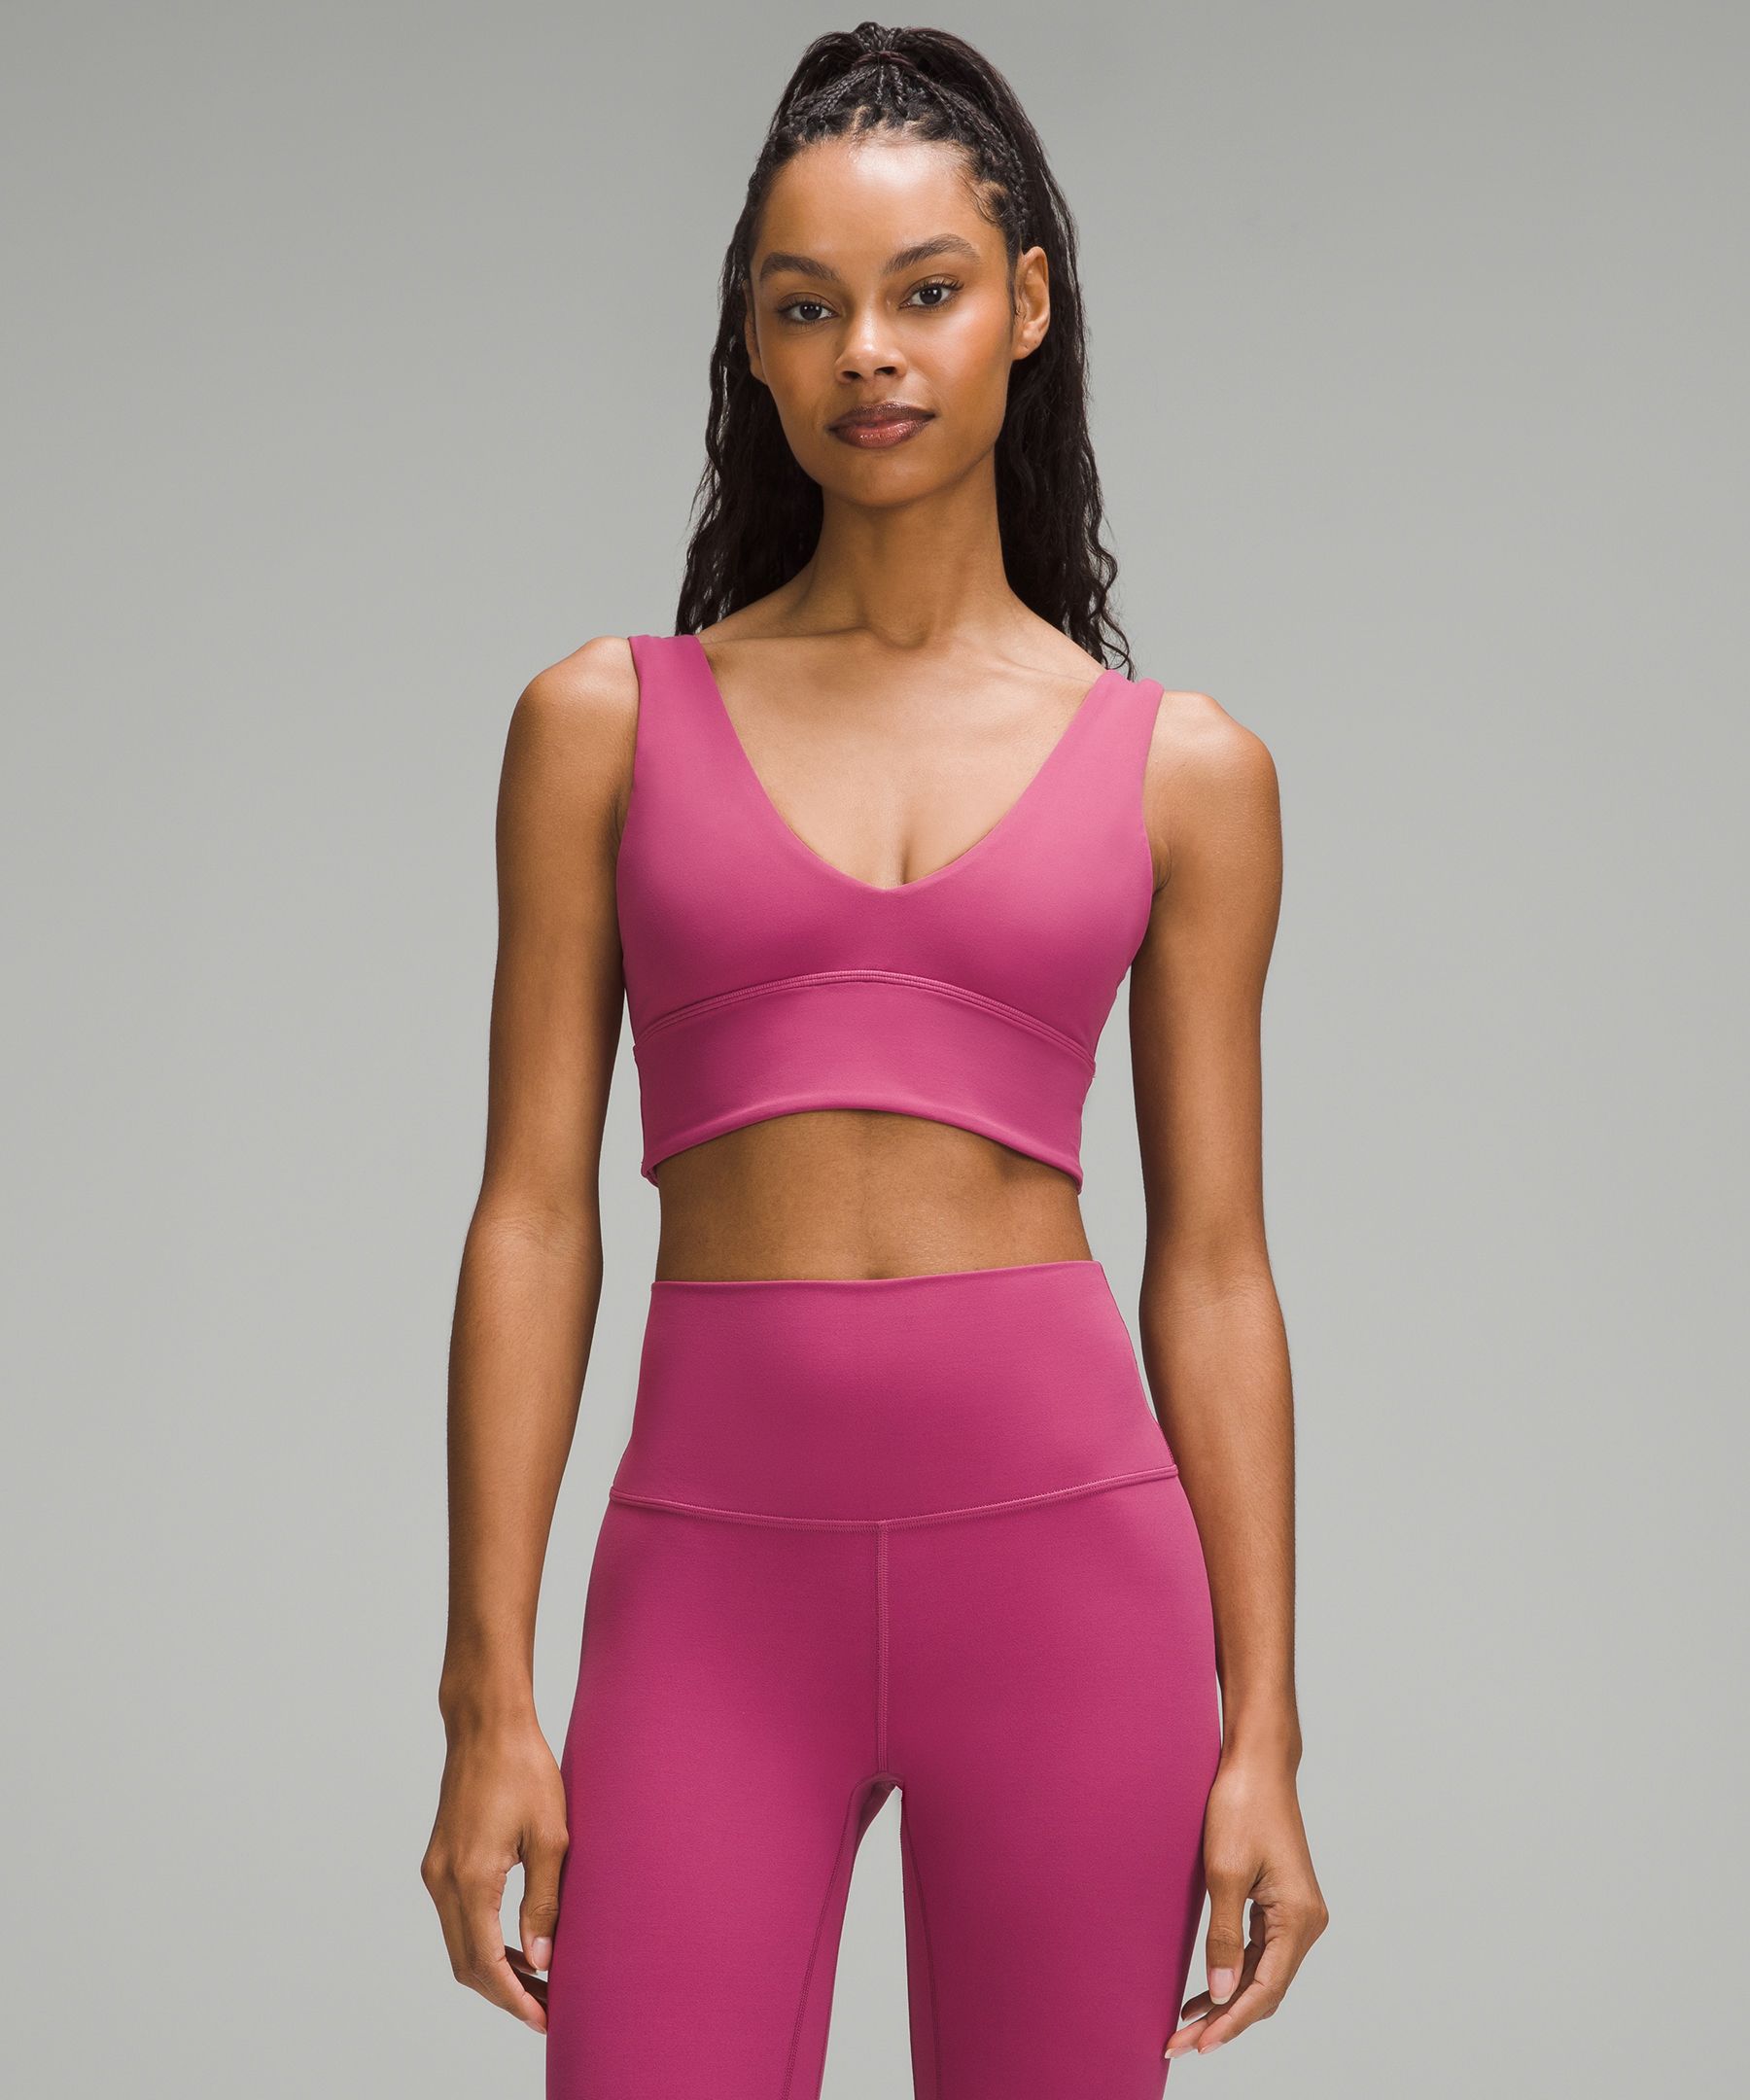 Outfit LOLI Womens Naked Feel Black Align Tank With Padded Sports Bra,  Cross Back Spaghetti Straps, And Crop Top For Fitness, Running, Workout,  Exercise, Or Yoga From Ejuhua, $16.72